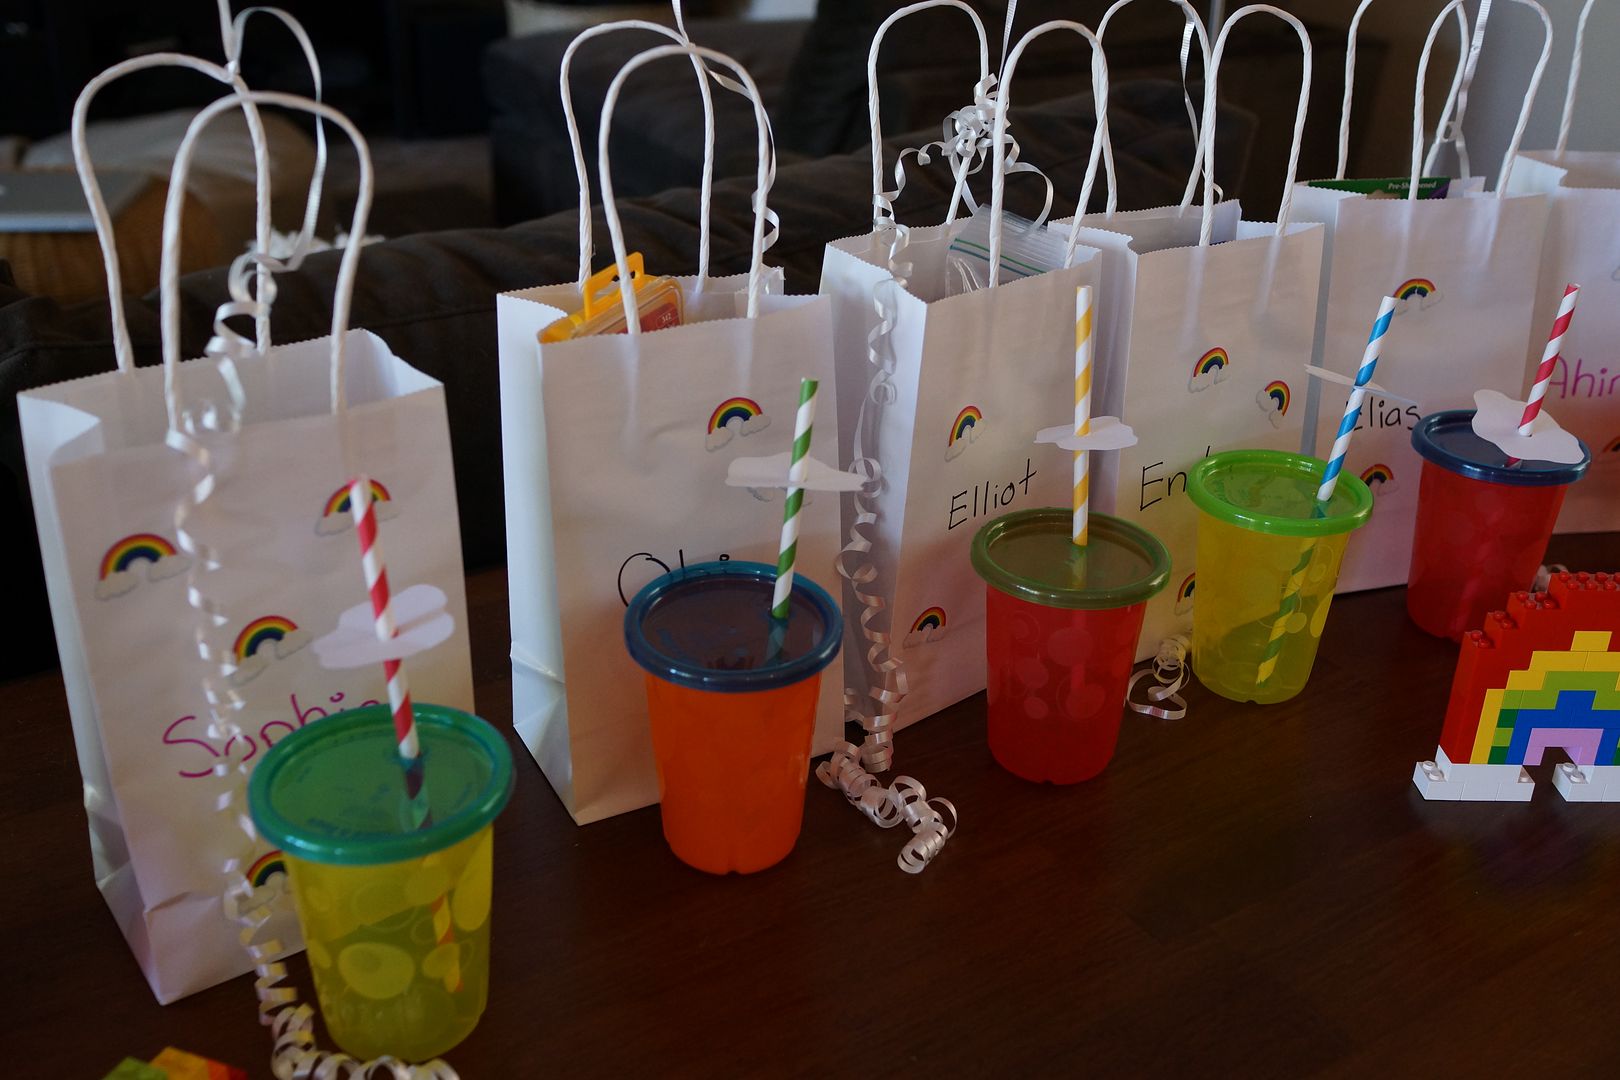 Anne's Odds and Ends: Rainbow Theme Birthday Party - Favors, Food and